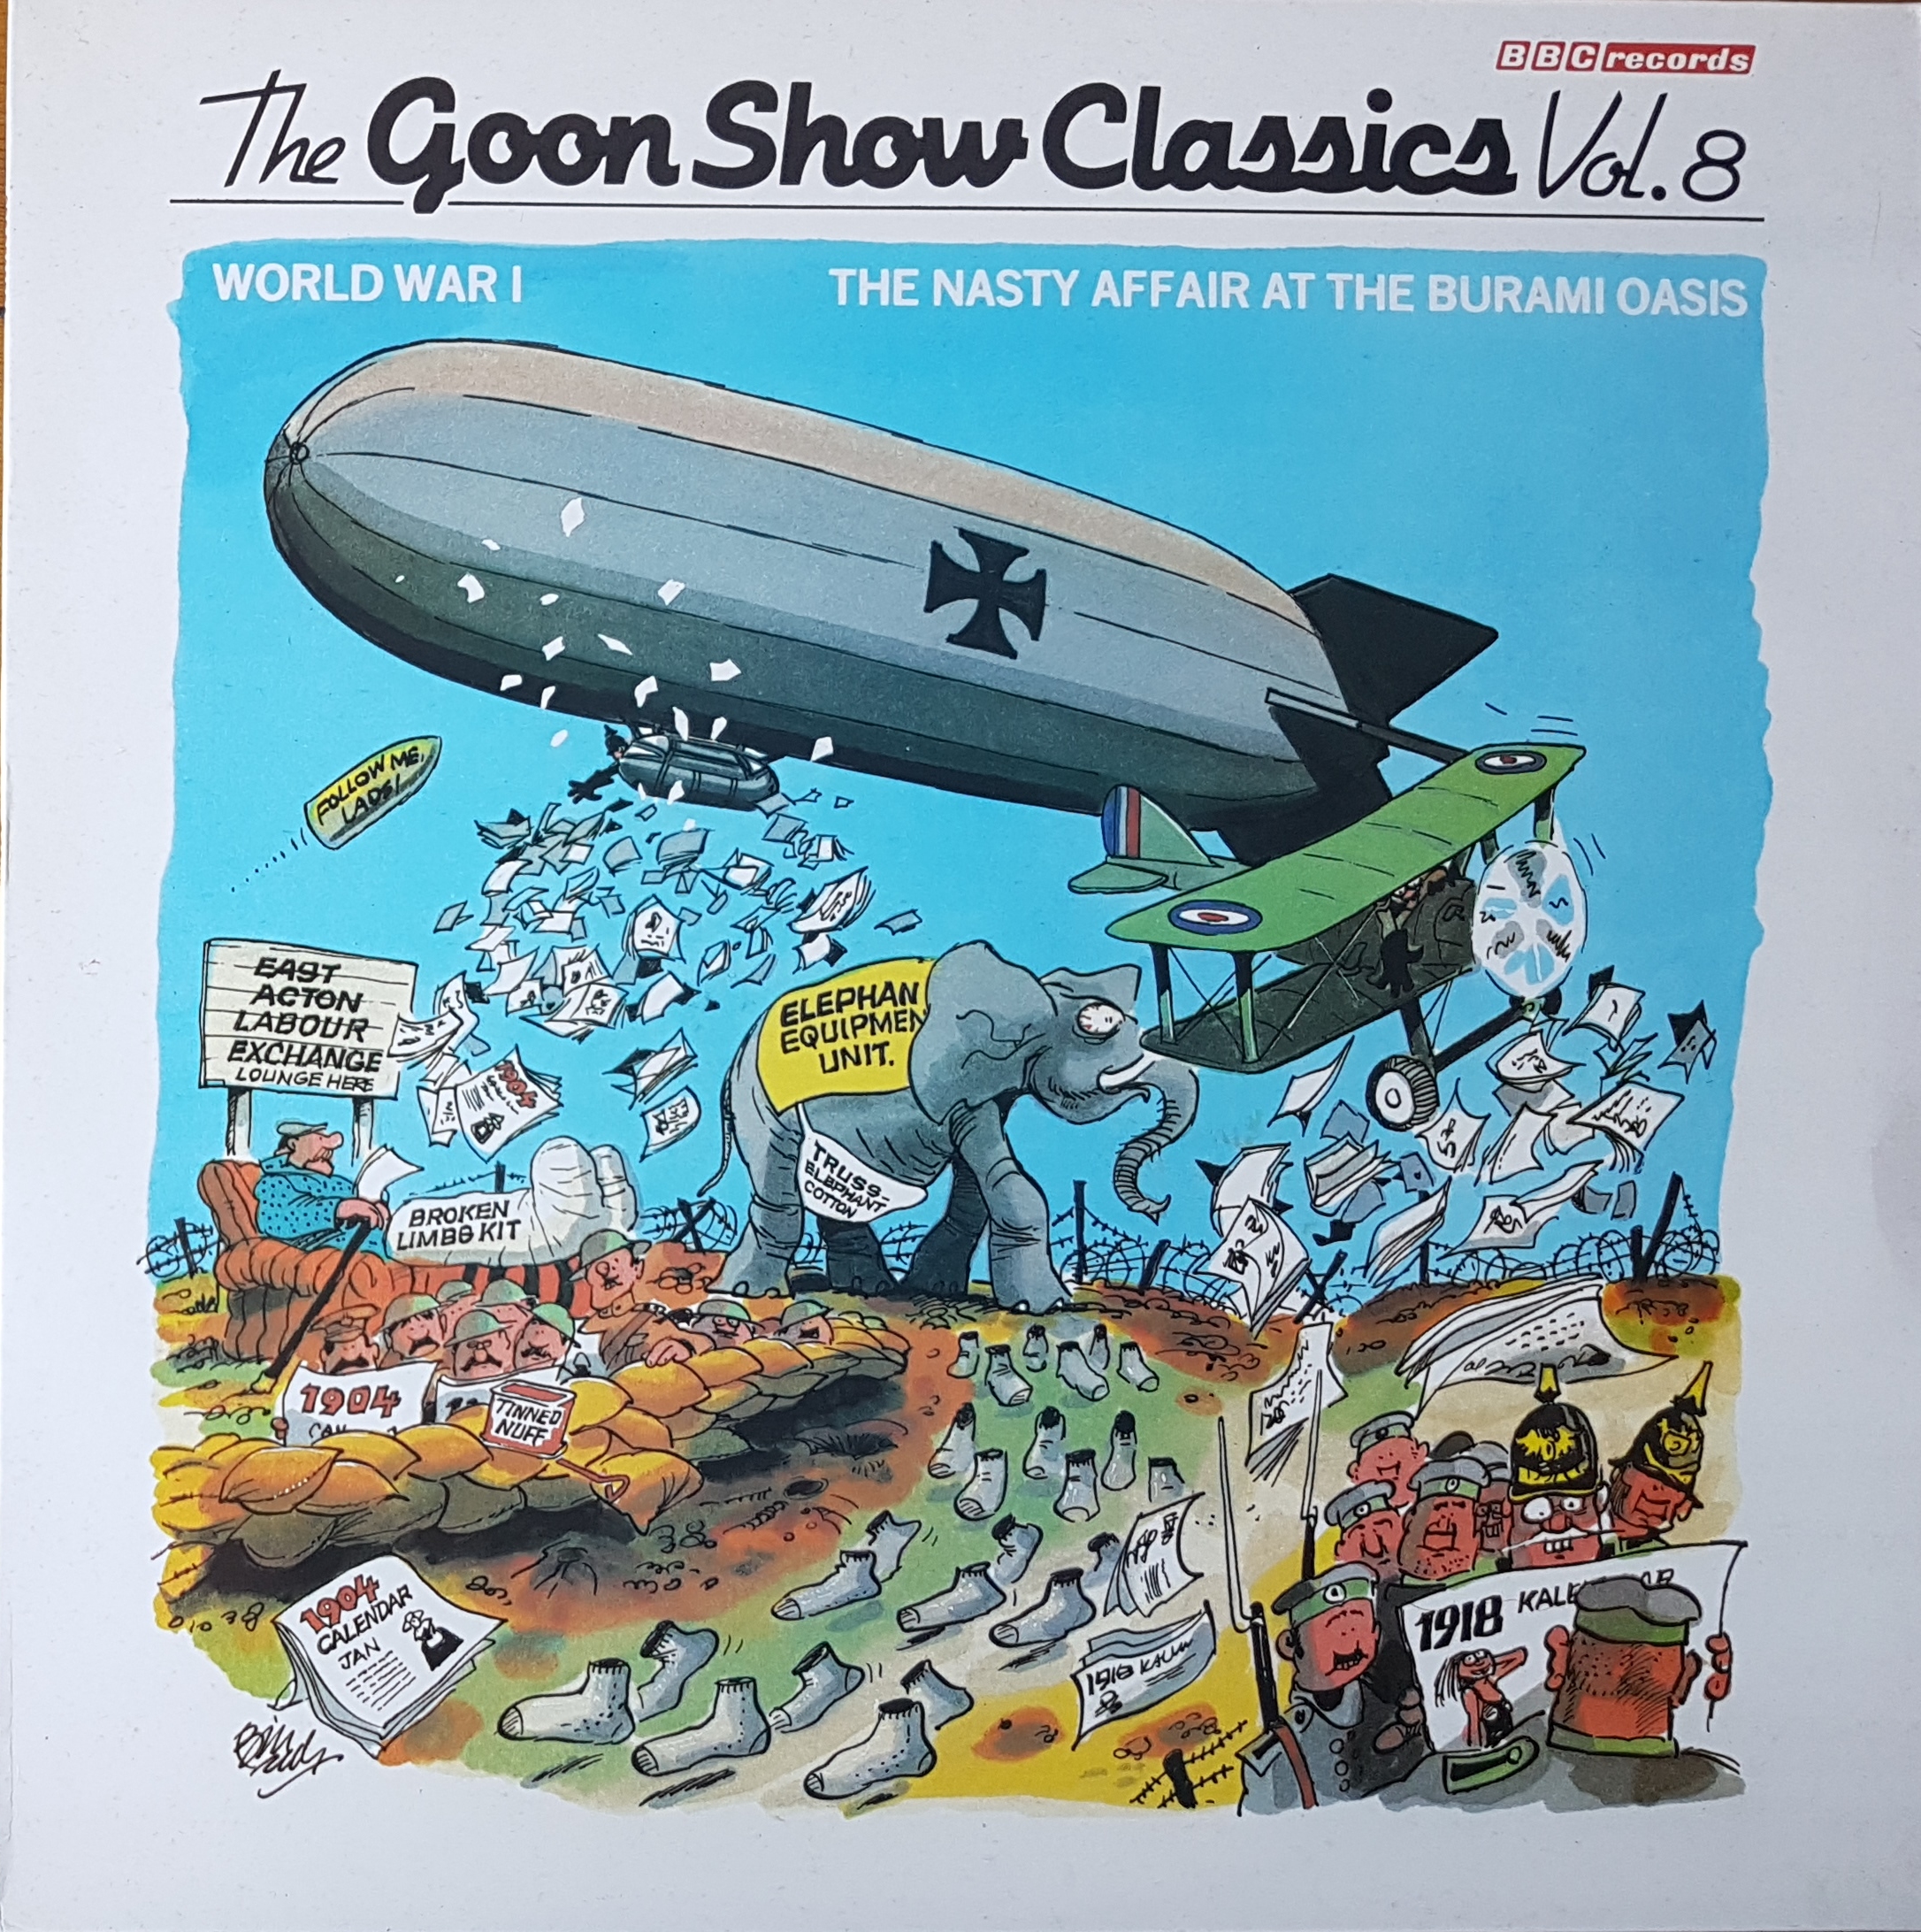 Picture of REB 422 Goon show classics - Volume 8 by artist Spike Milligan / Larry Stephens from the BBC albums - Records and Tapes library